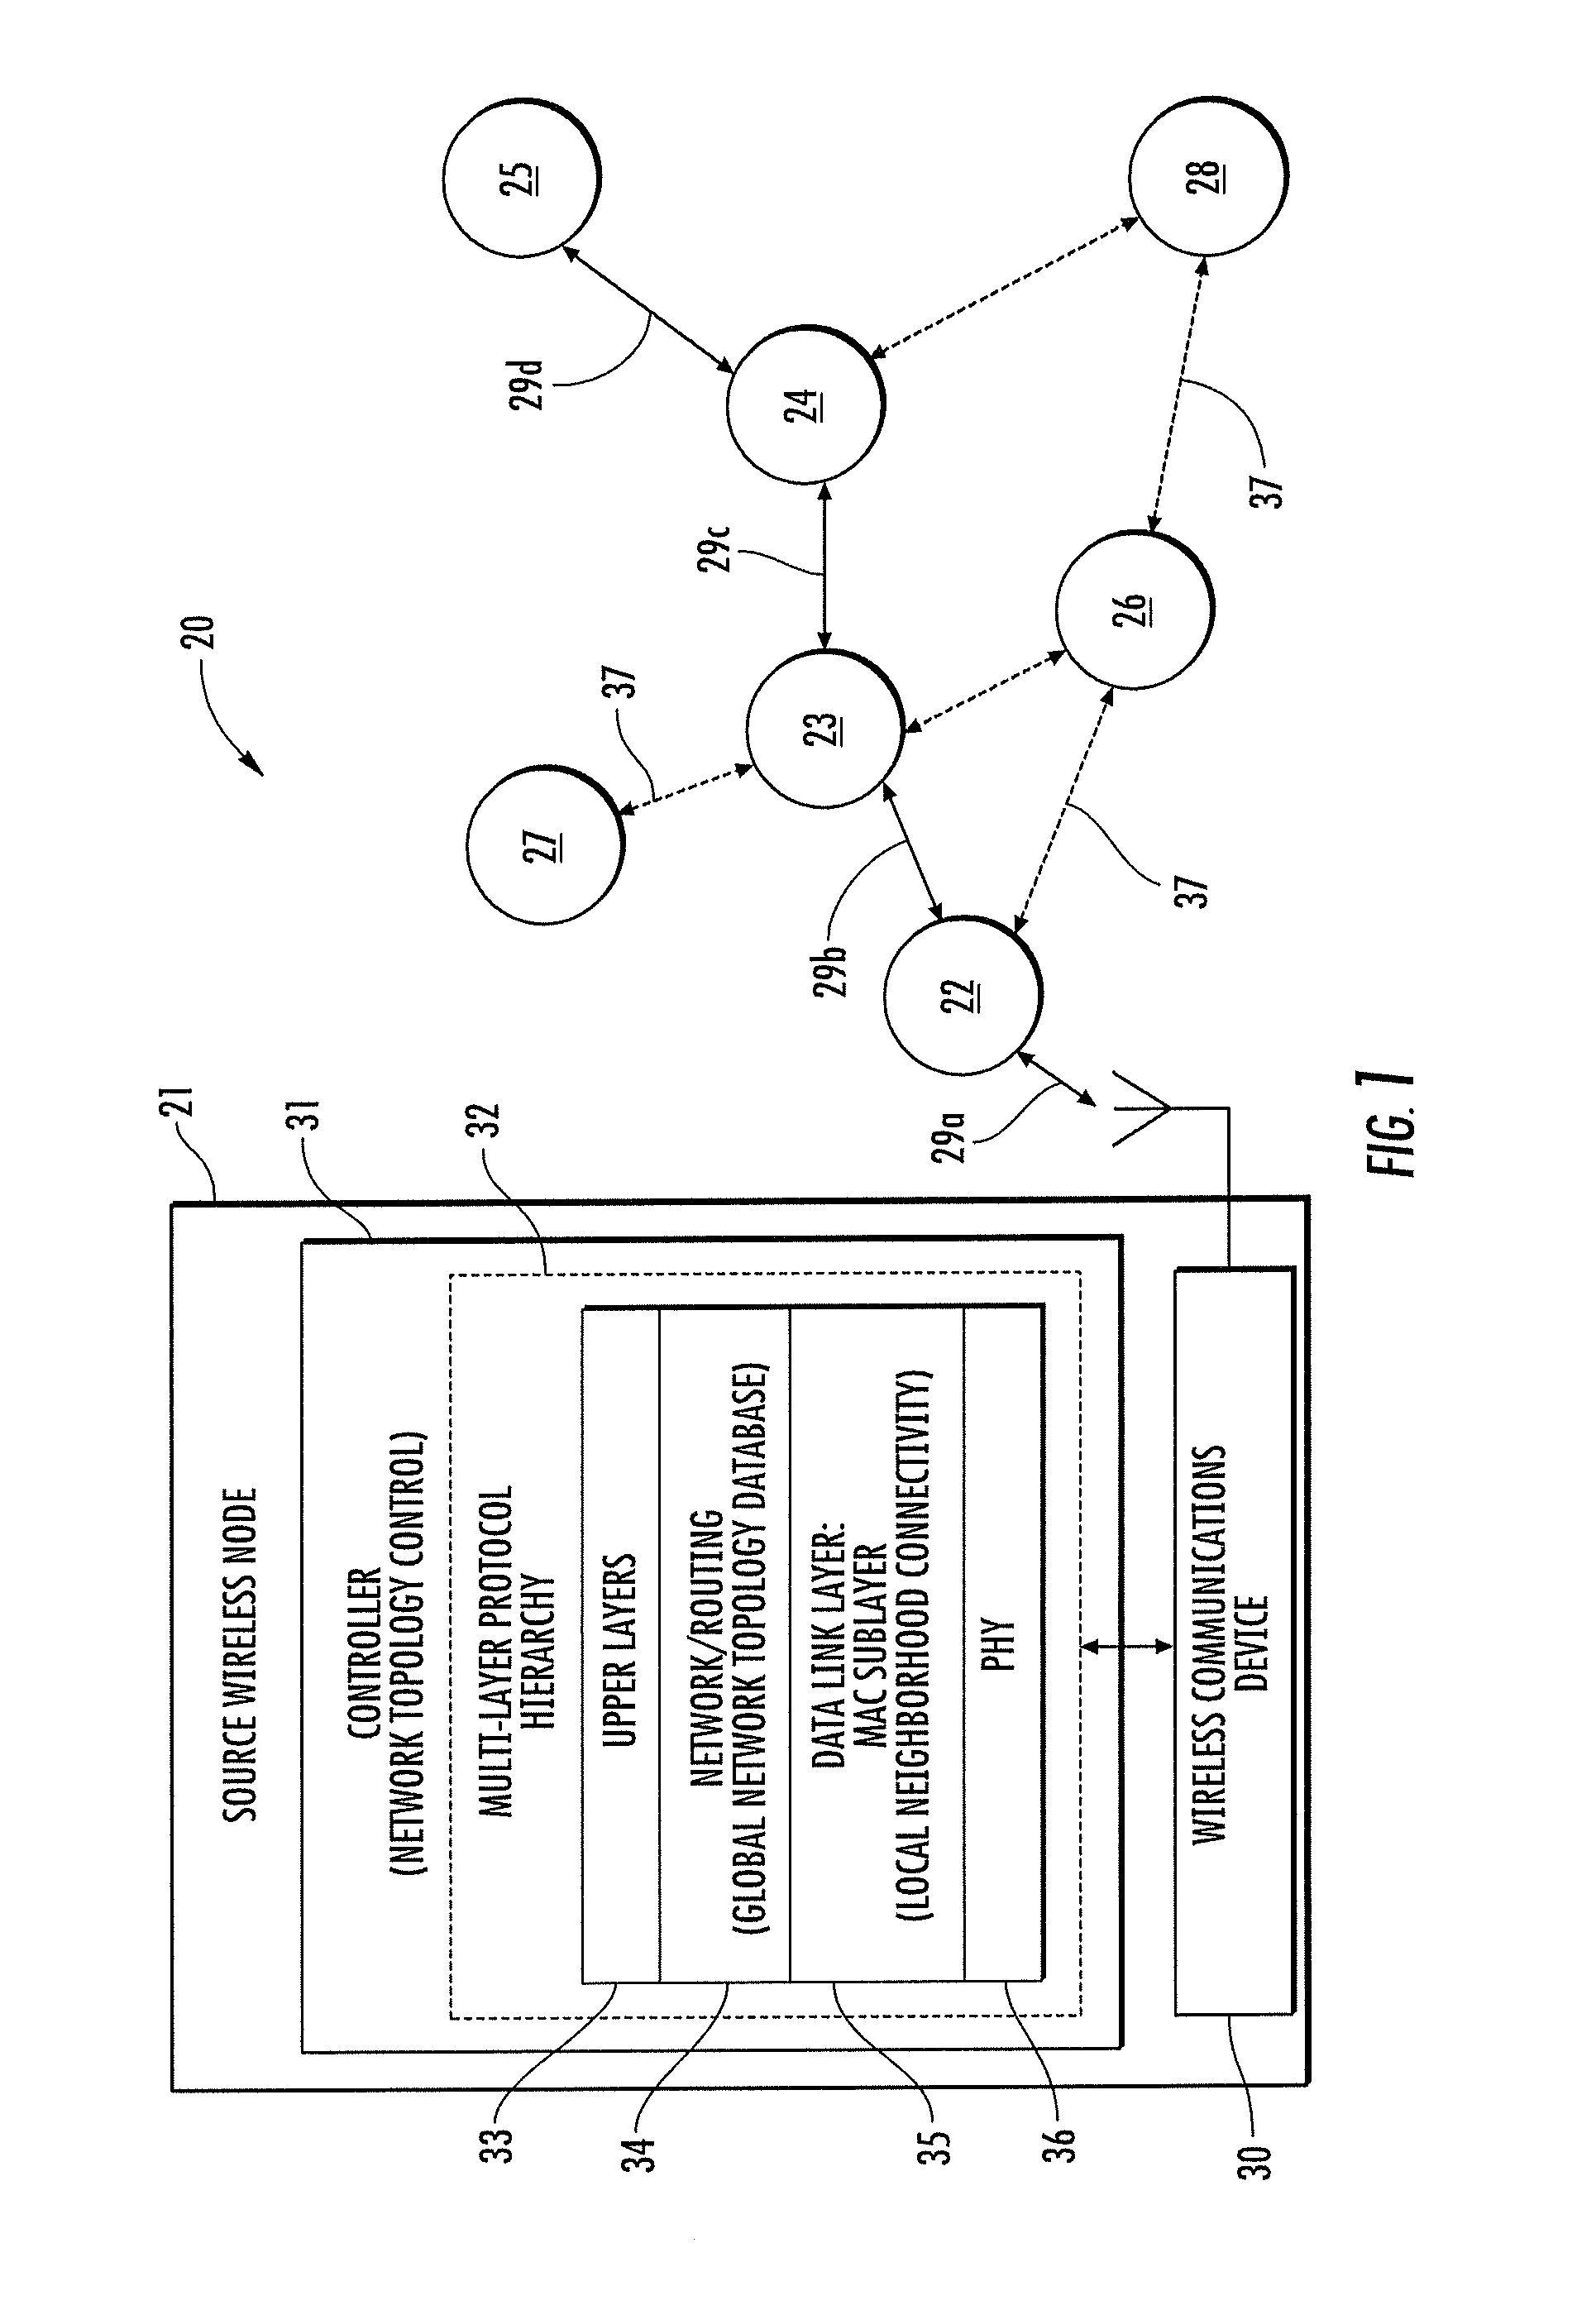 Network layer topology management for mobile ad-hoc networks and associated methods